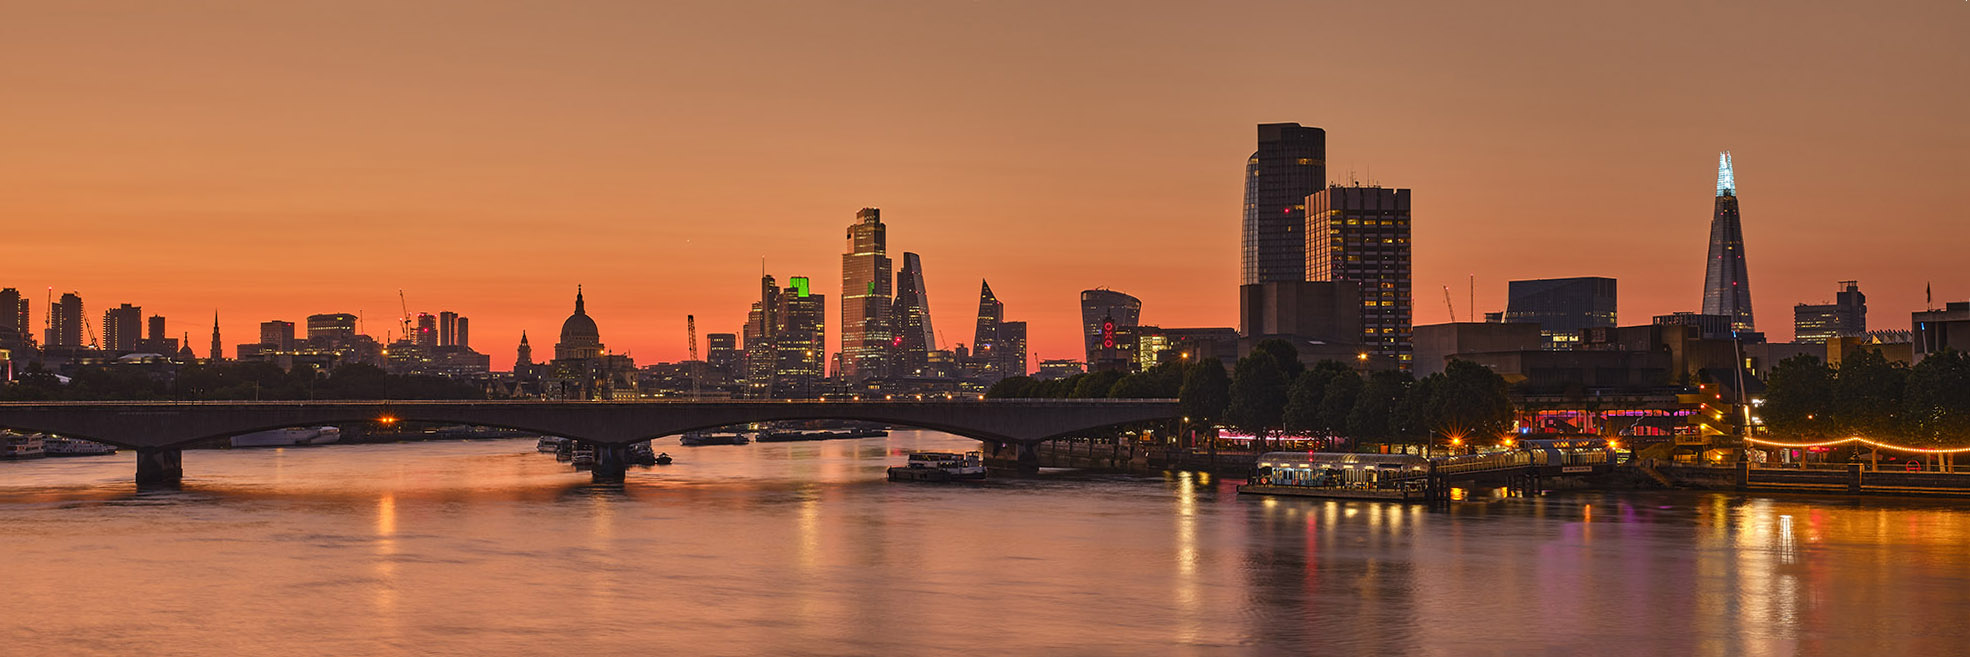 Photograph of the London skyline and River Thames at dawn